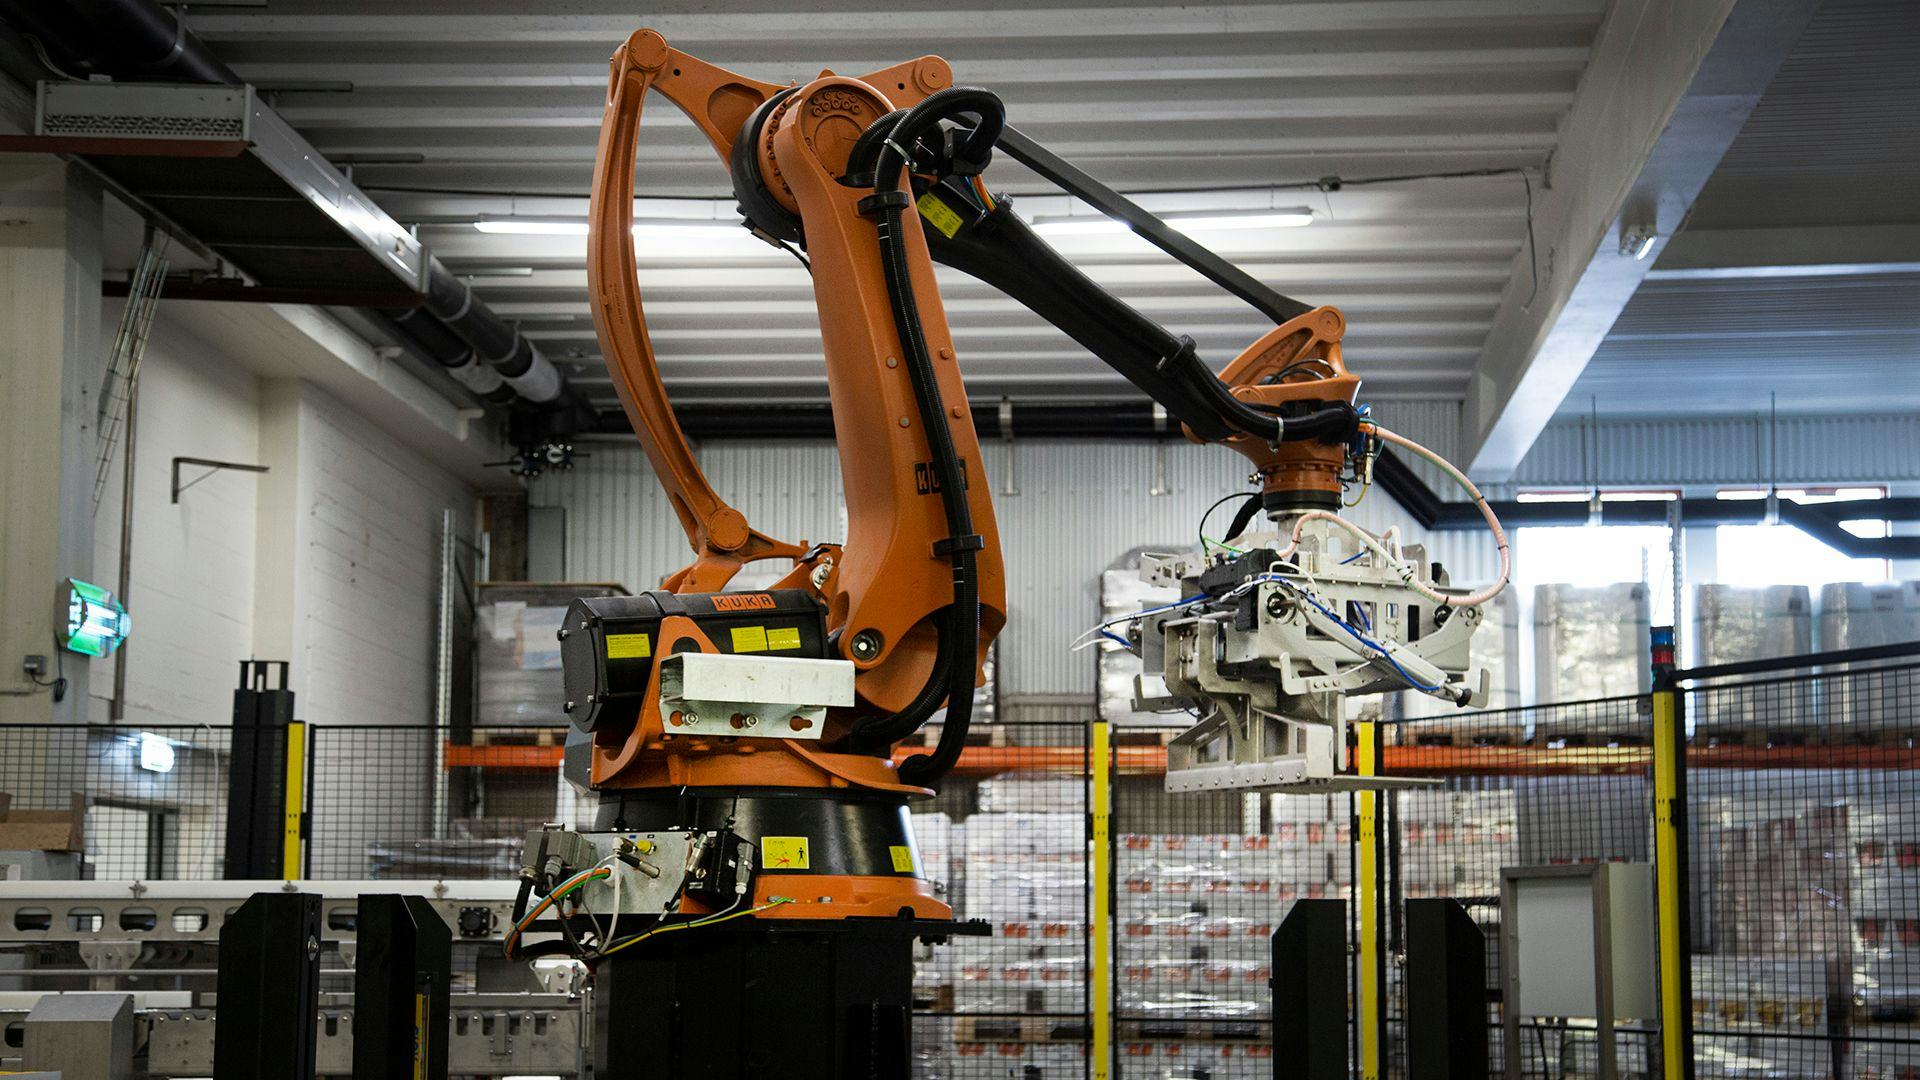 An industrial robot situated in a manufacturing facility with pallets of goods in the background